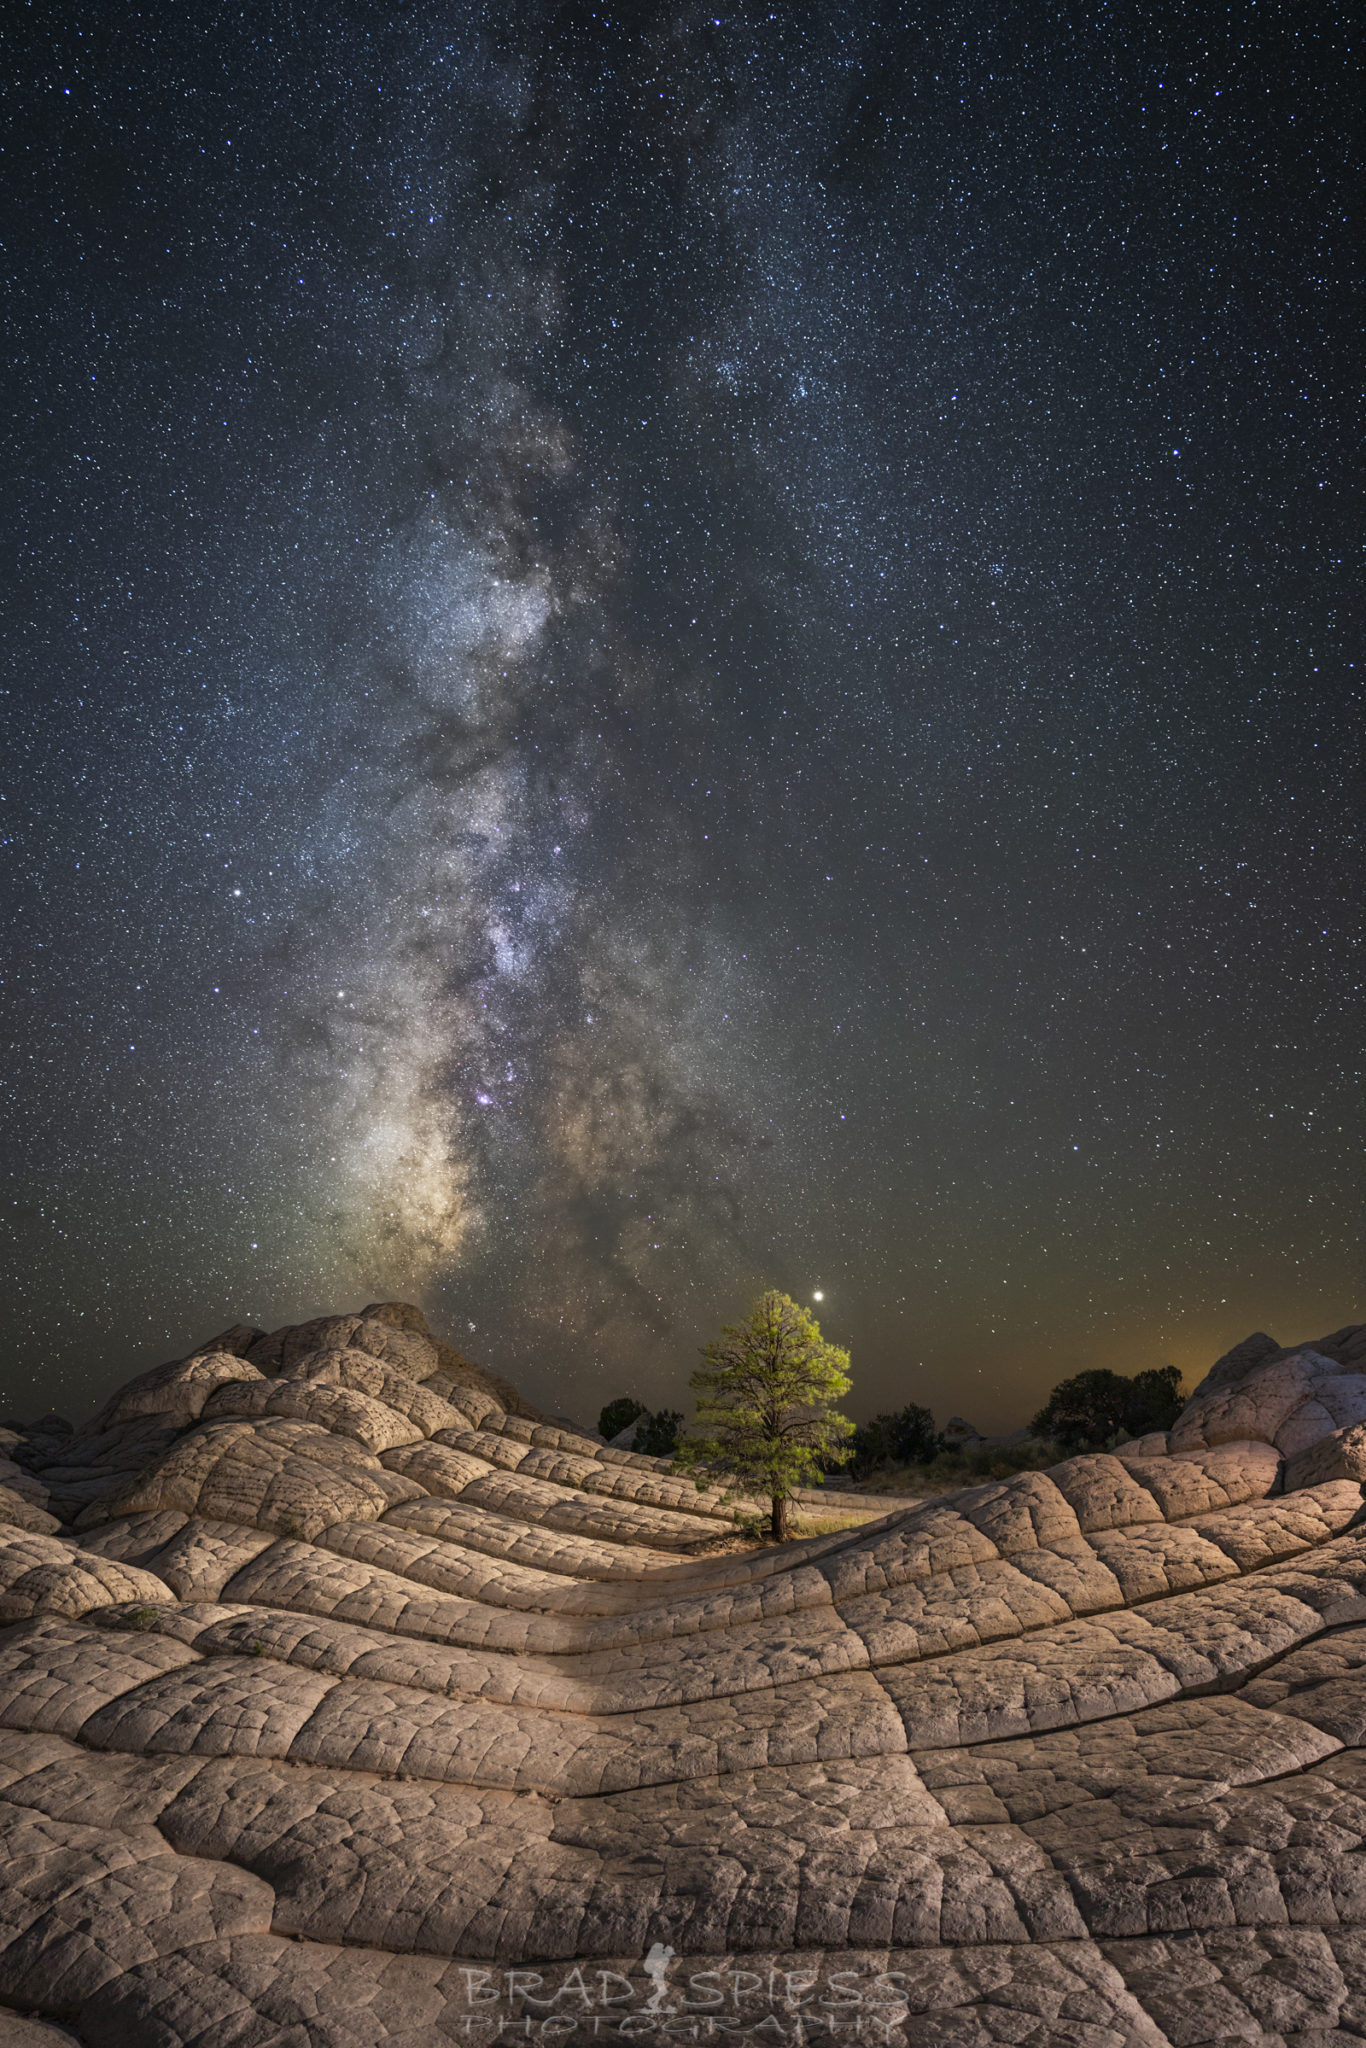 The Milky Way rising up behind the well light lone tree and landscape at White Pocket.